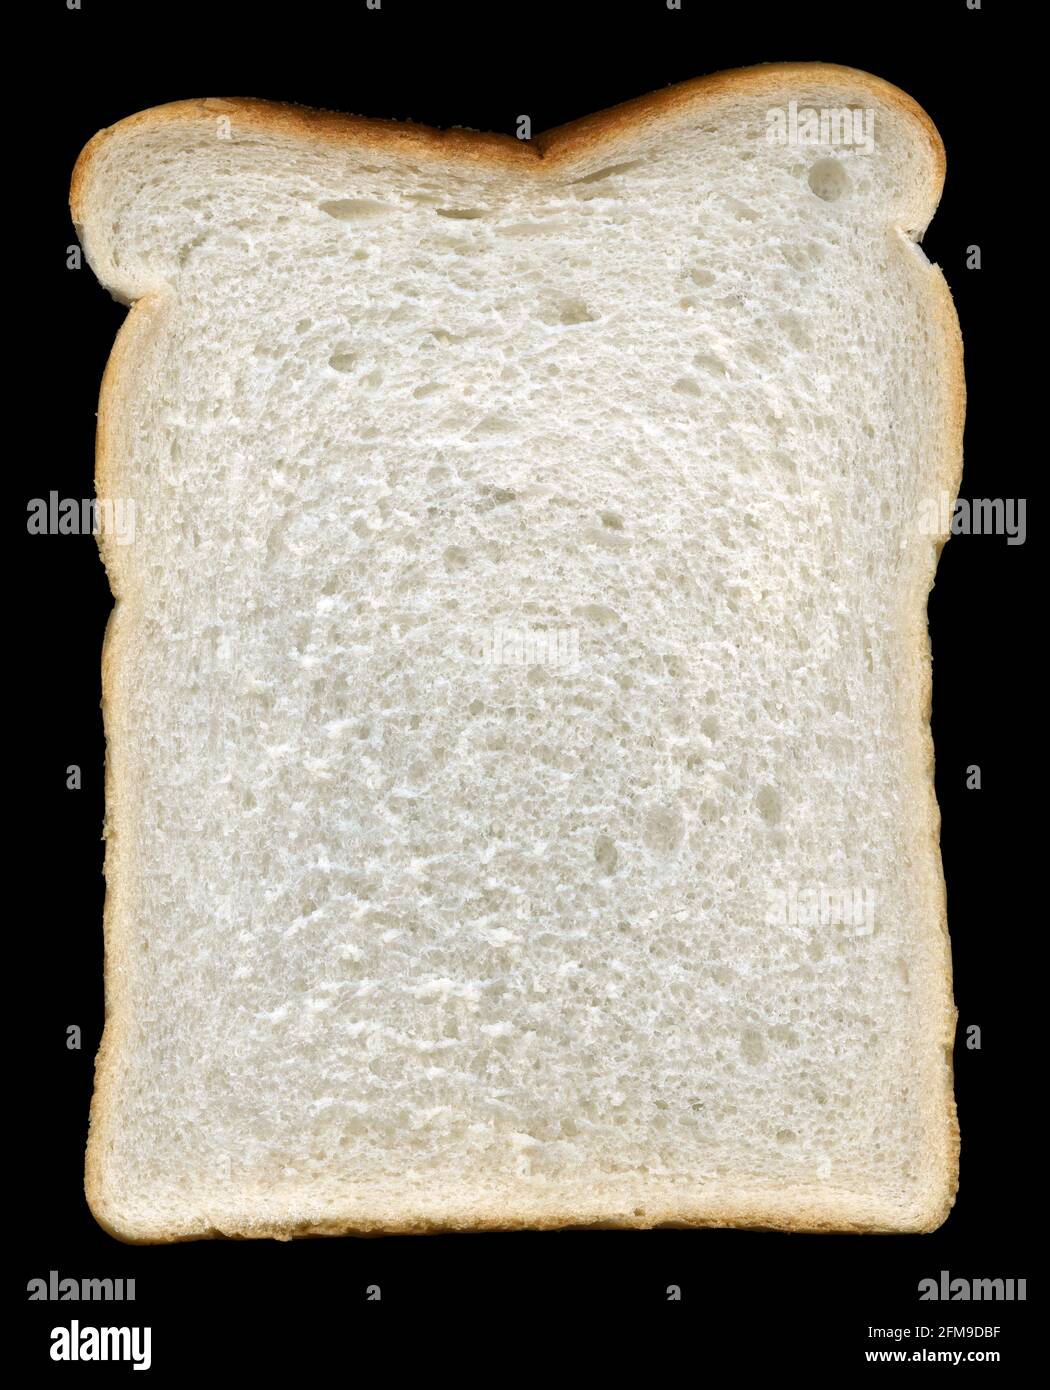 A flat on shot of a slice of sliced white bread with crust Stock Photo